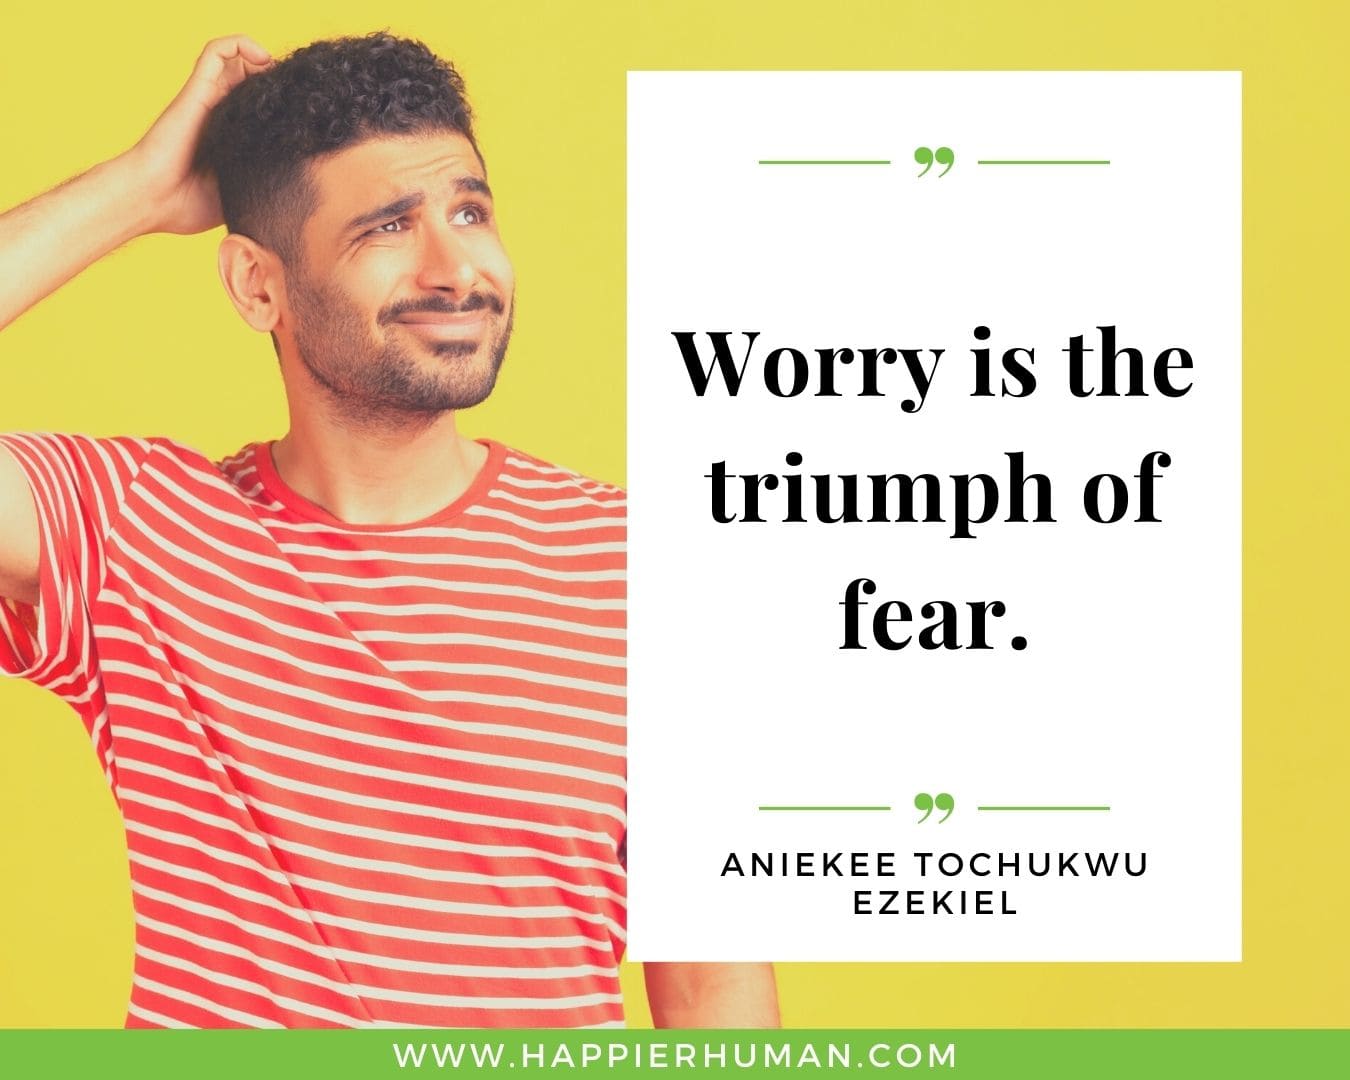 Overthinking Quotes - “Worry is the triumph of fear.” - Aniekee Tochukwu Ezekiel